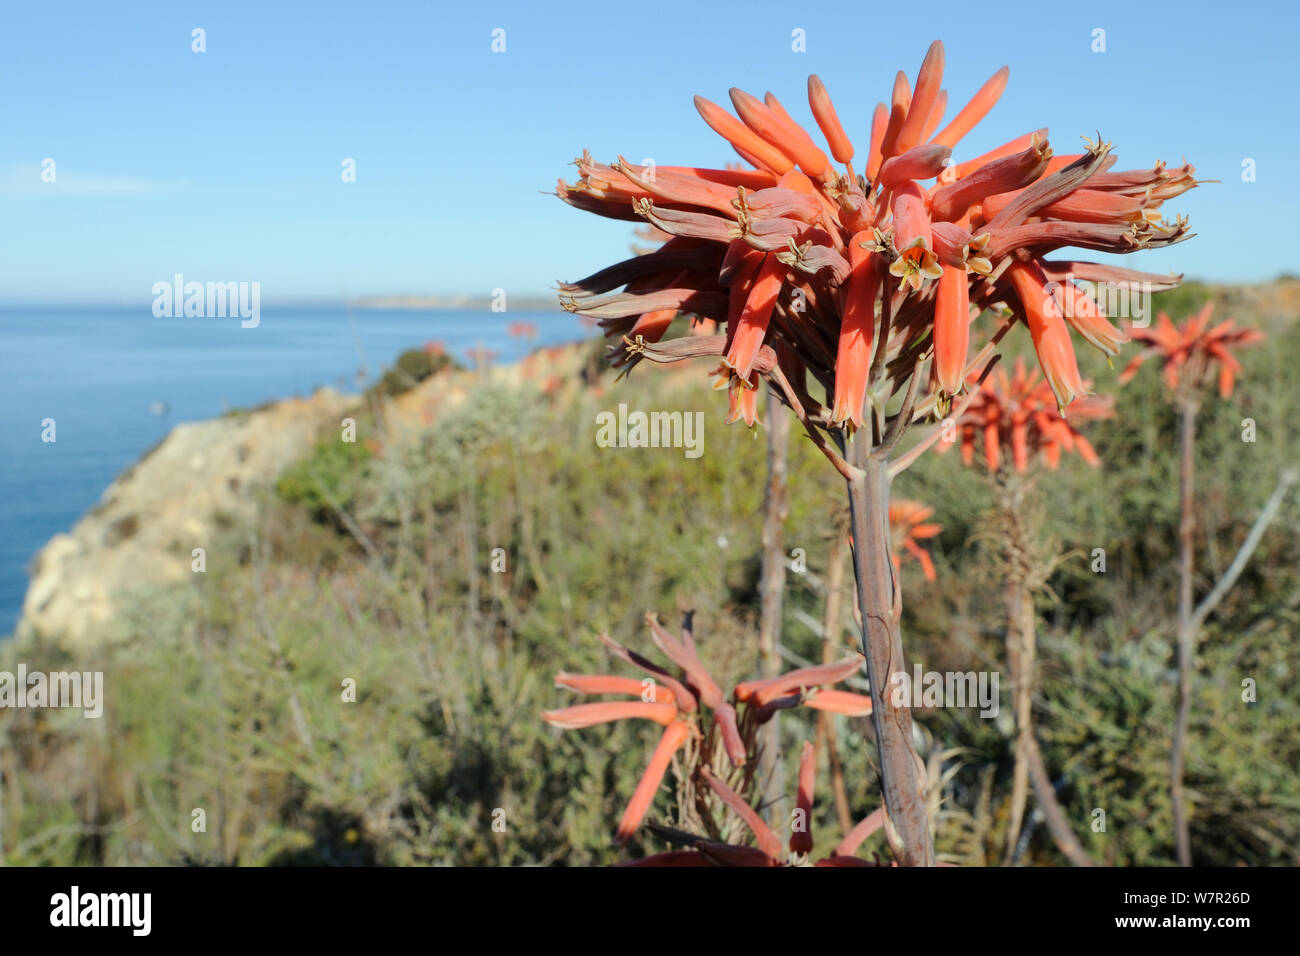 Soap Aloe (Aloe maculata / saponaria) flowering on a clifftop with the sea in the background. Algarve, Portugal, June. Stock Photo